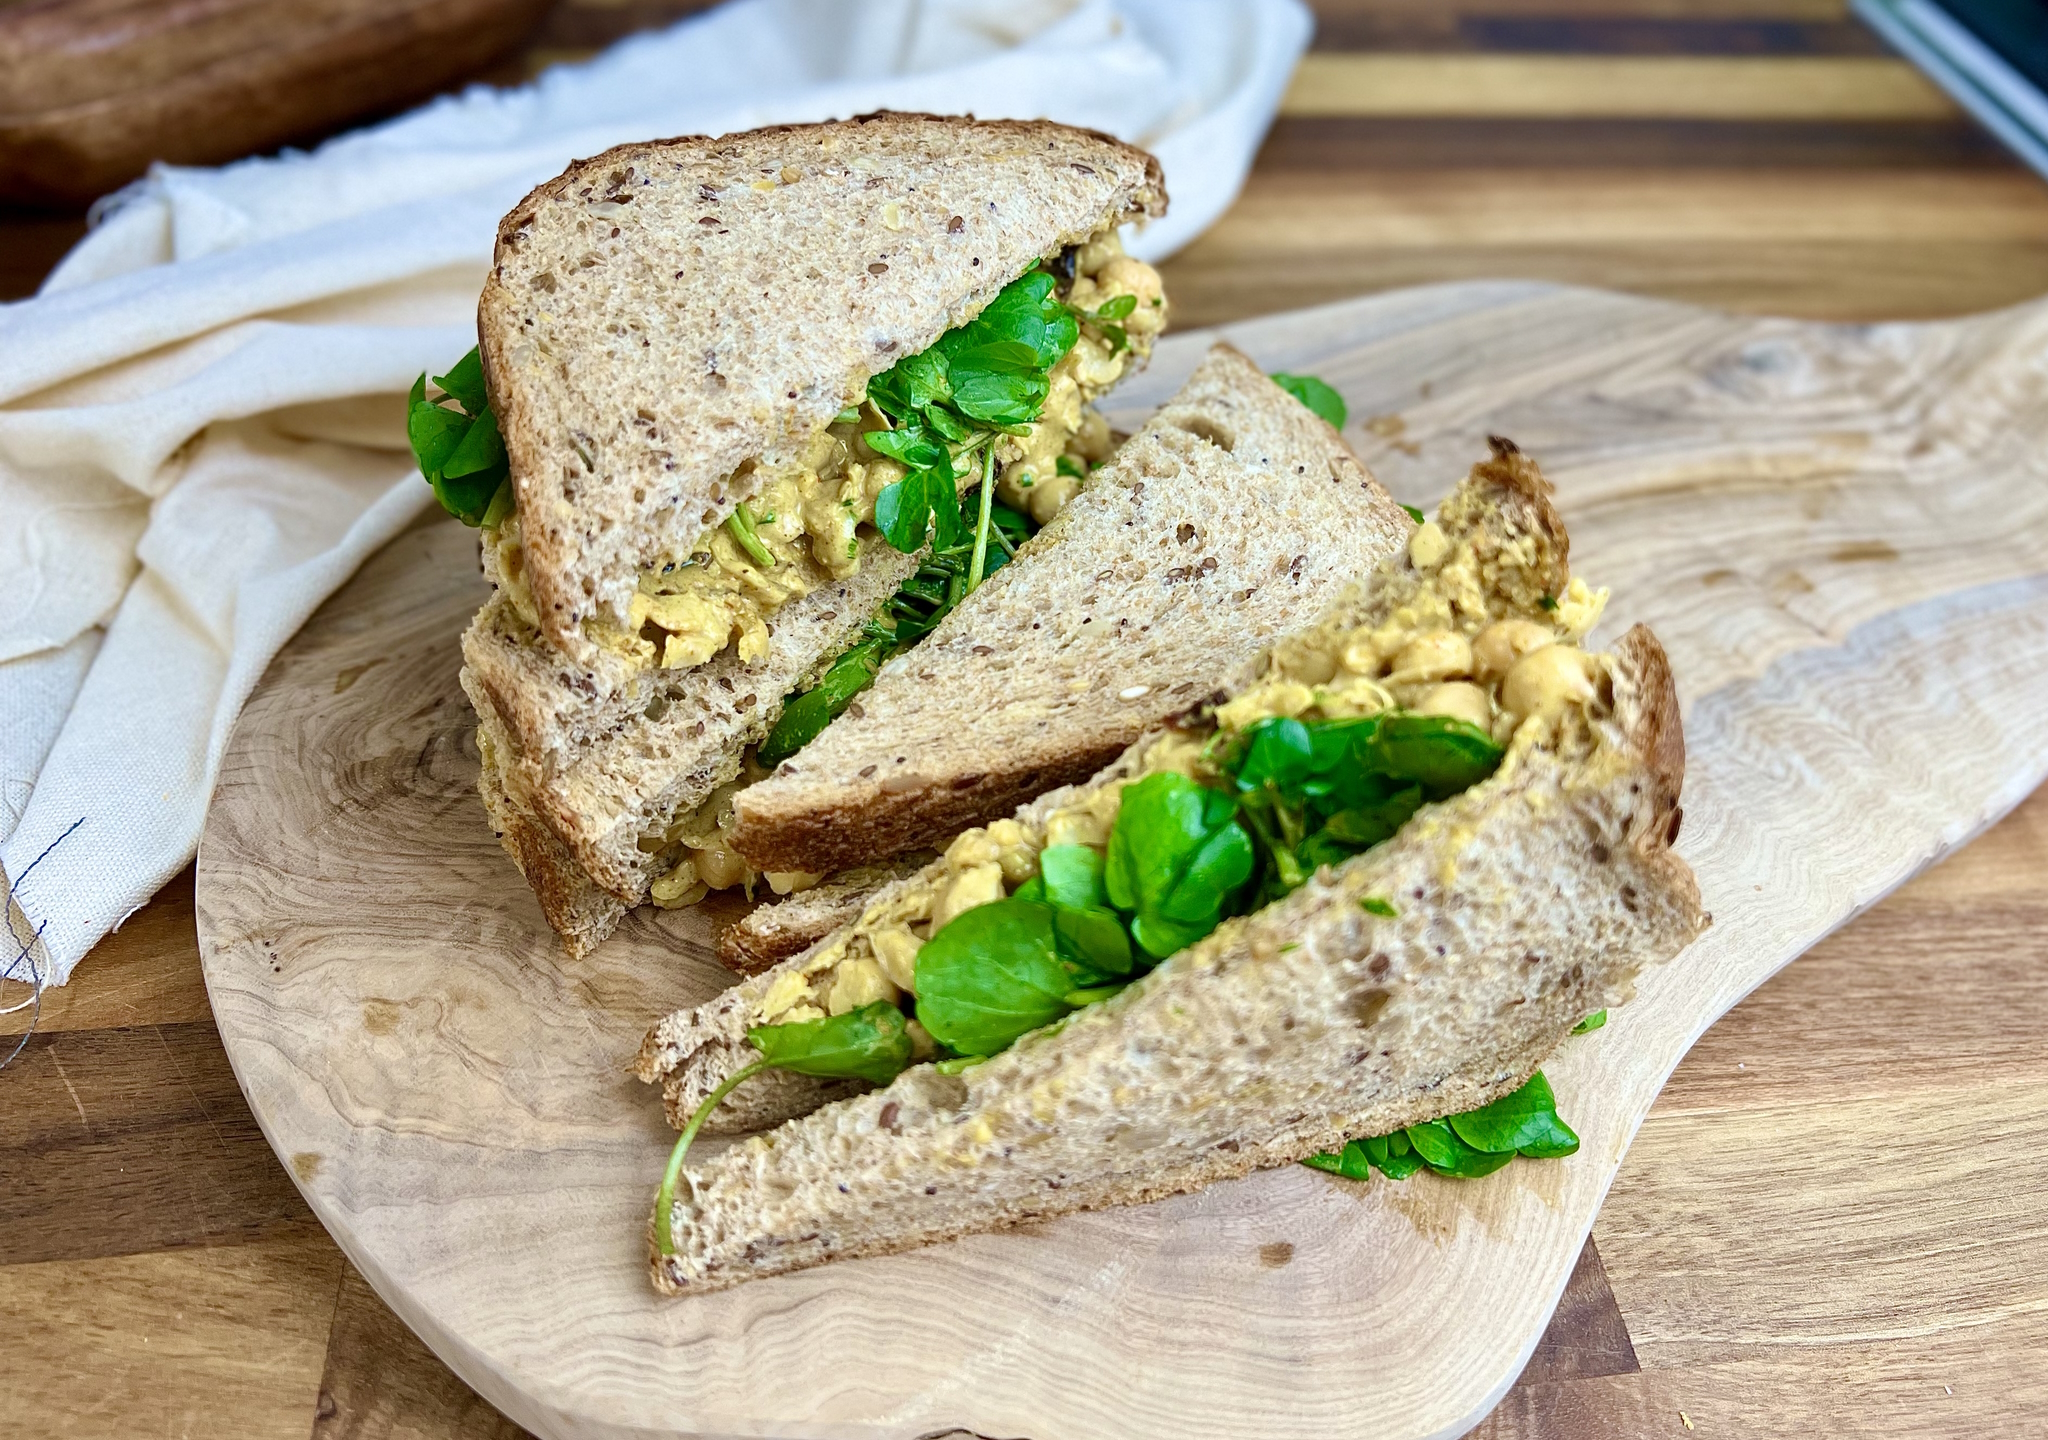 Vegan Coronation Chickpeas, a delicious creamy sandwich filling that’s quick and easy to make and requires no cooking. Chickpeas and raisins in a curry spiced mayo.